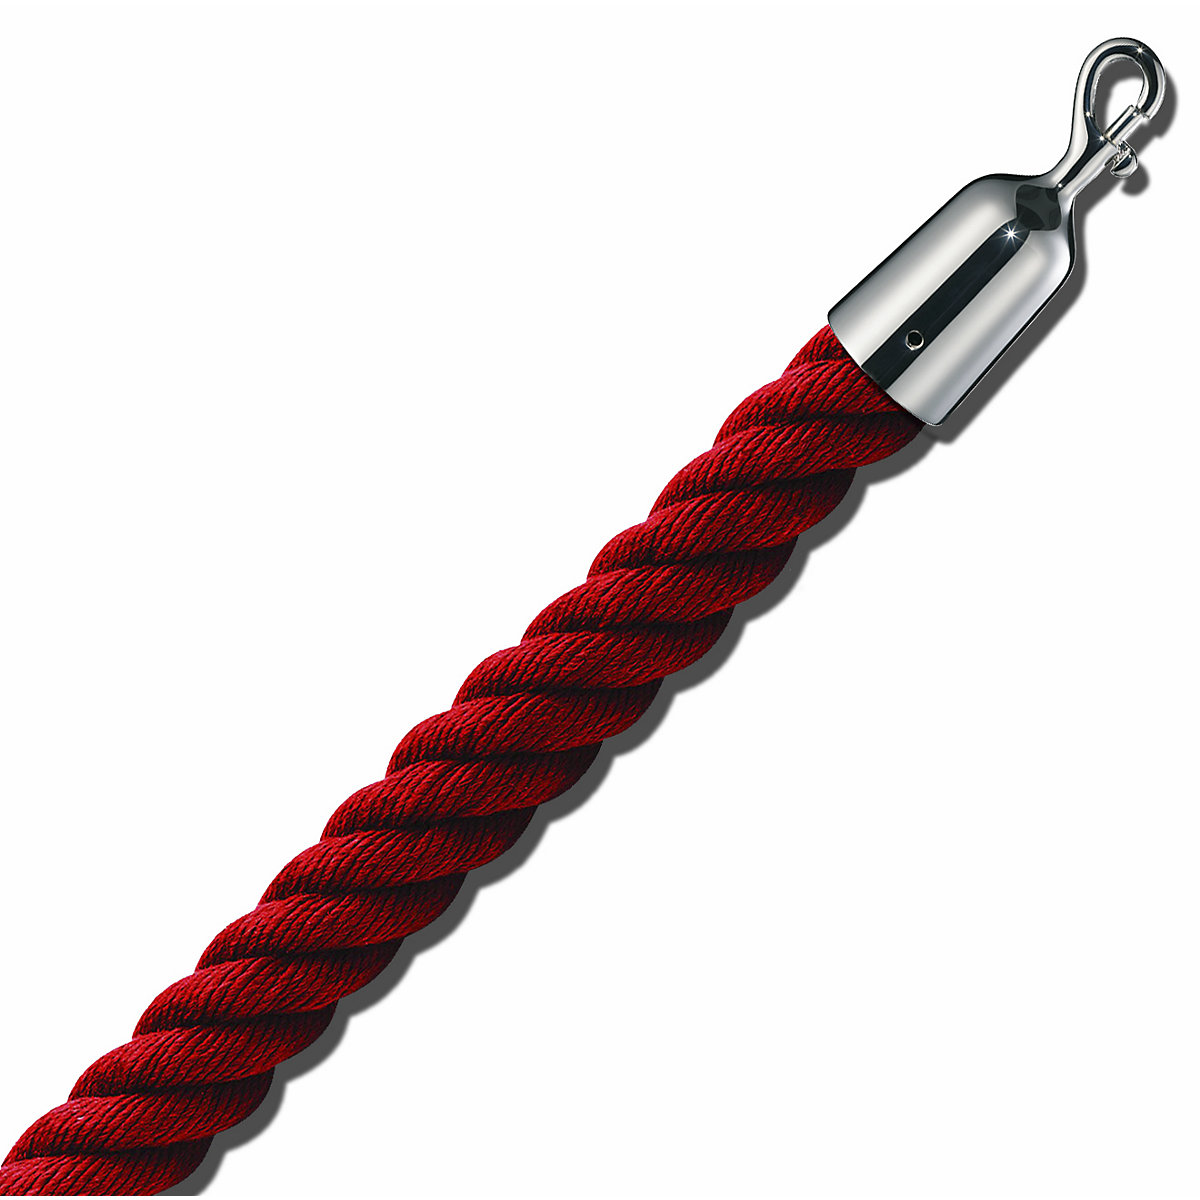 Barrier cord 1.5 m